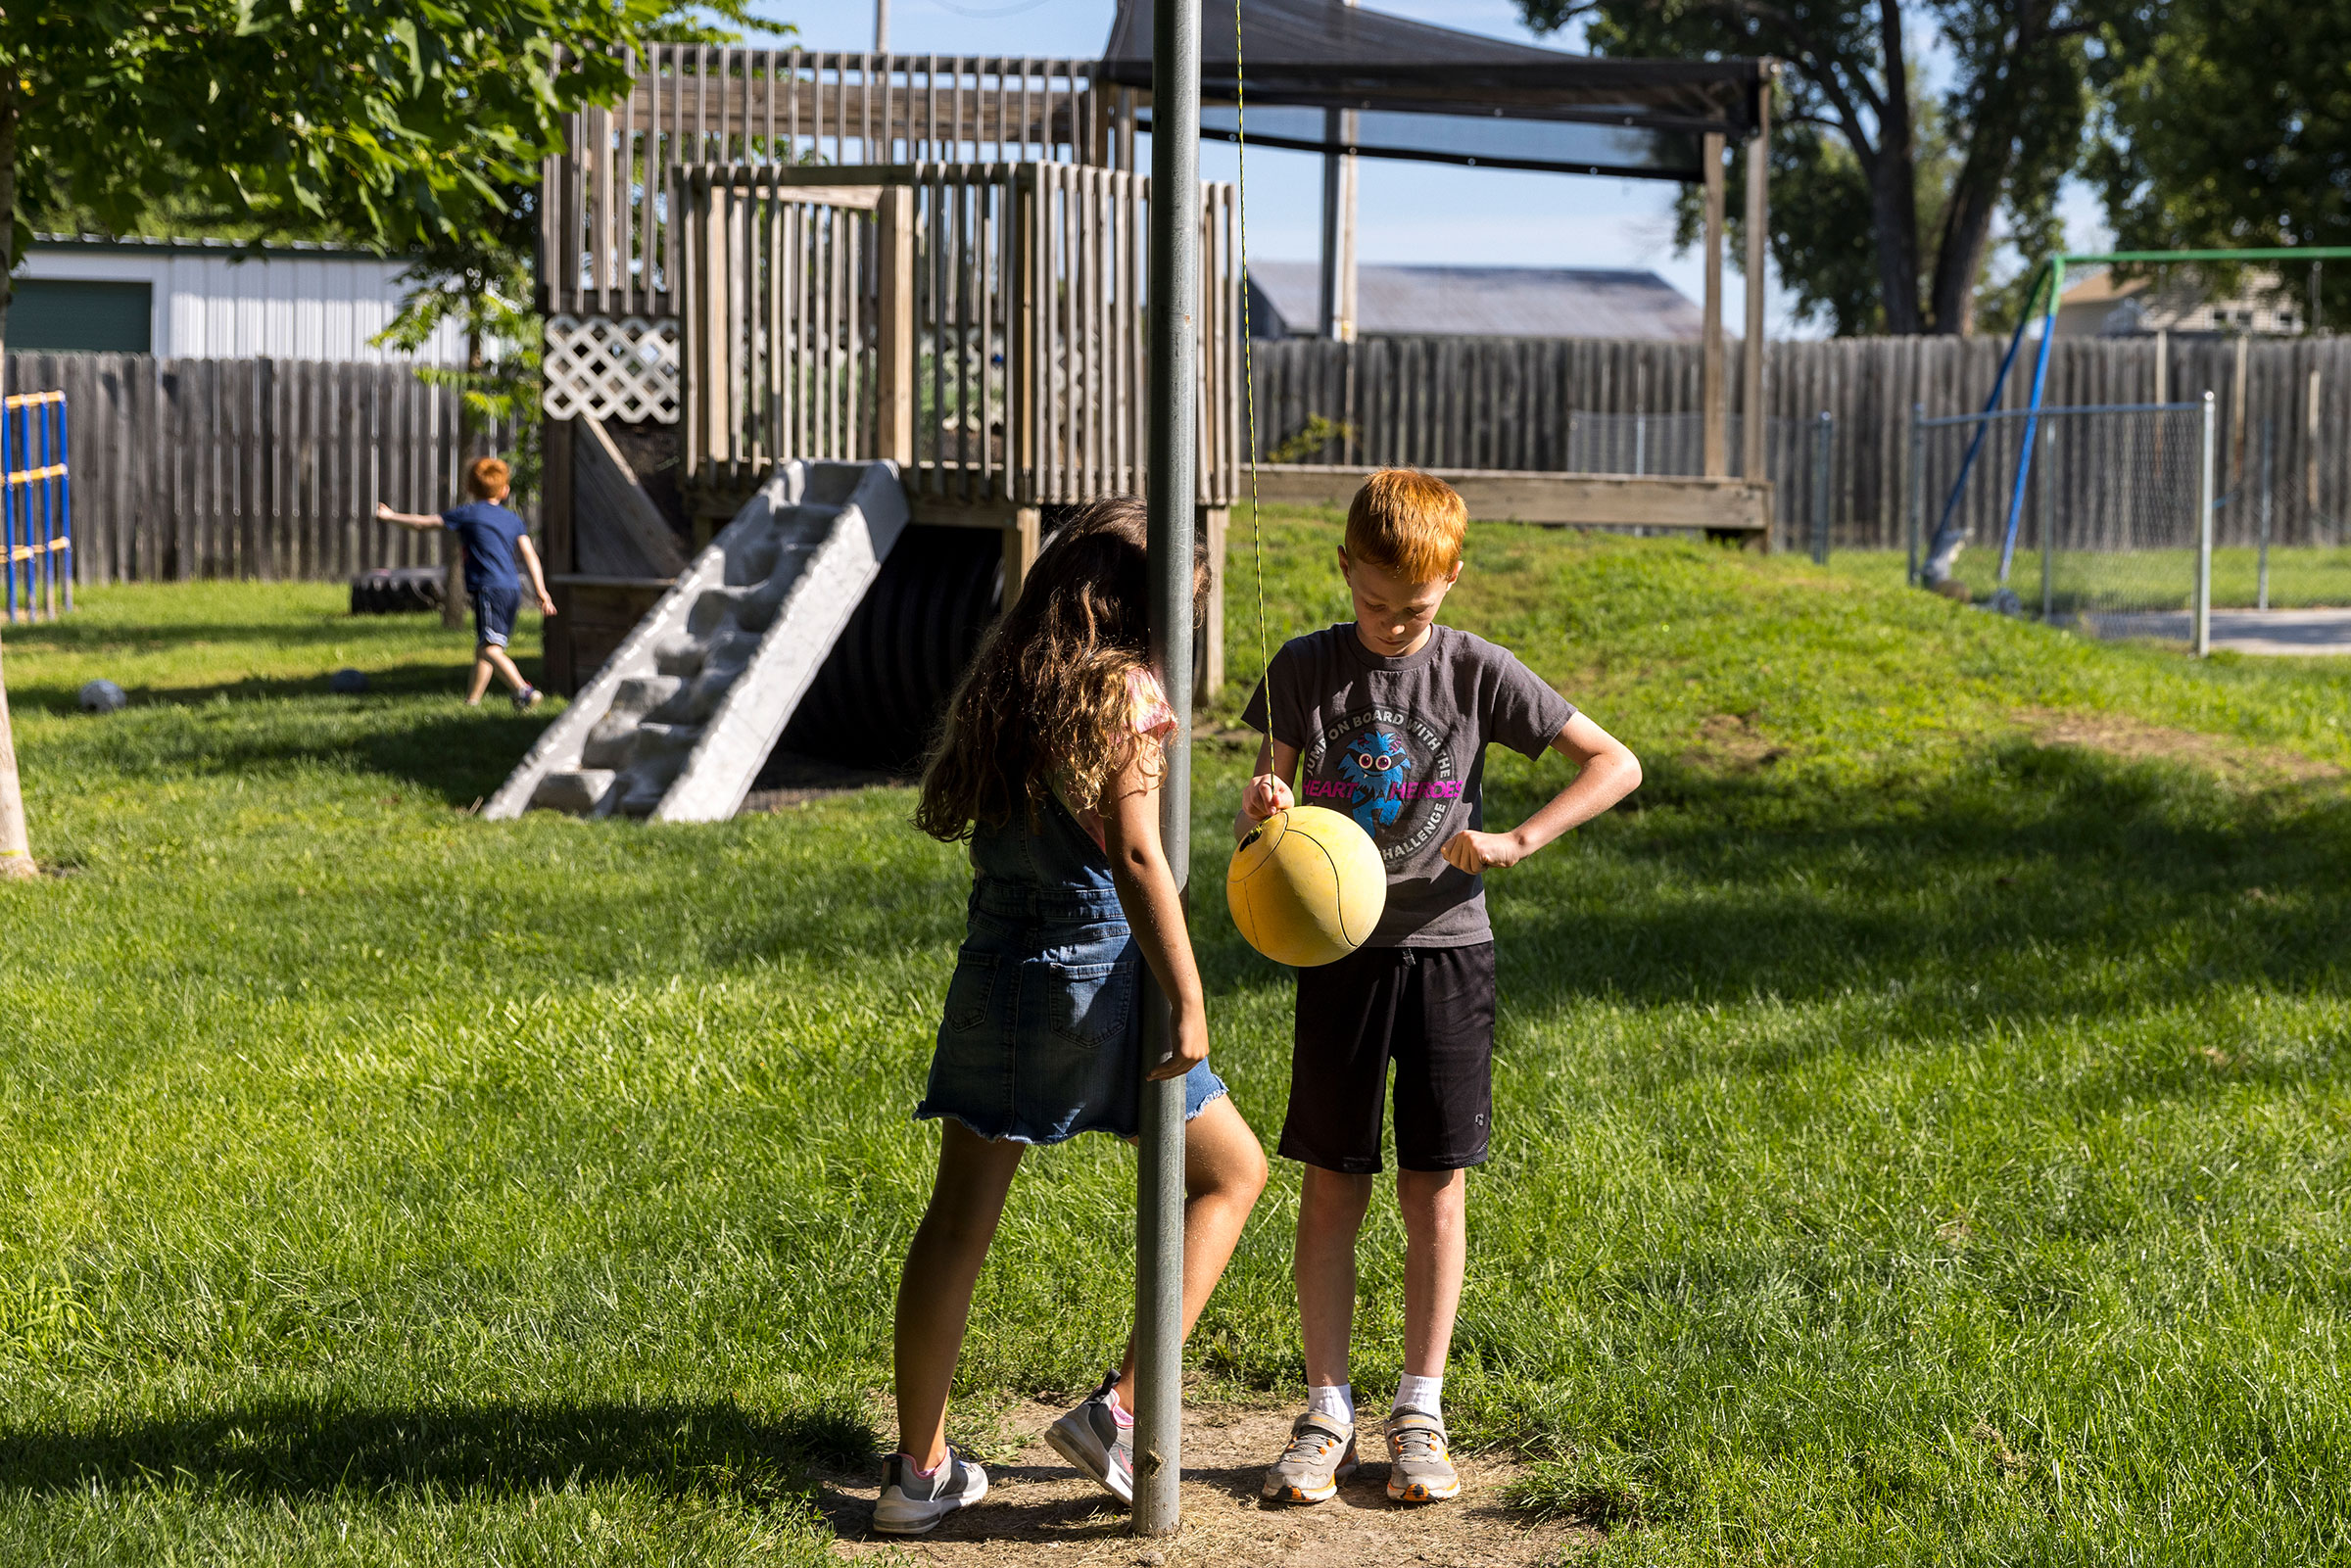 Hunter Rutkowski, age 10, and Alice Nefzger, age 8, play outside. While they will return to school soon, some parents with young children are still trying to cobble together a new childcare arrangement.